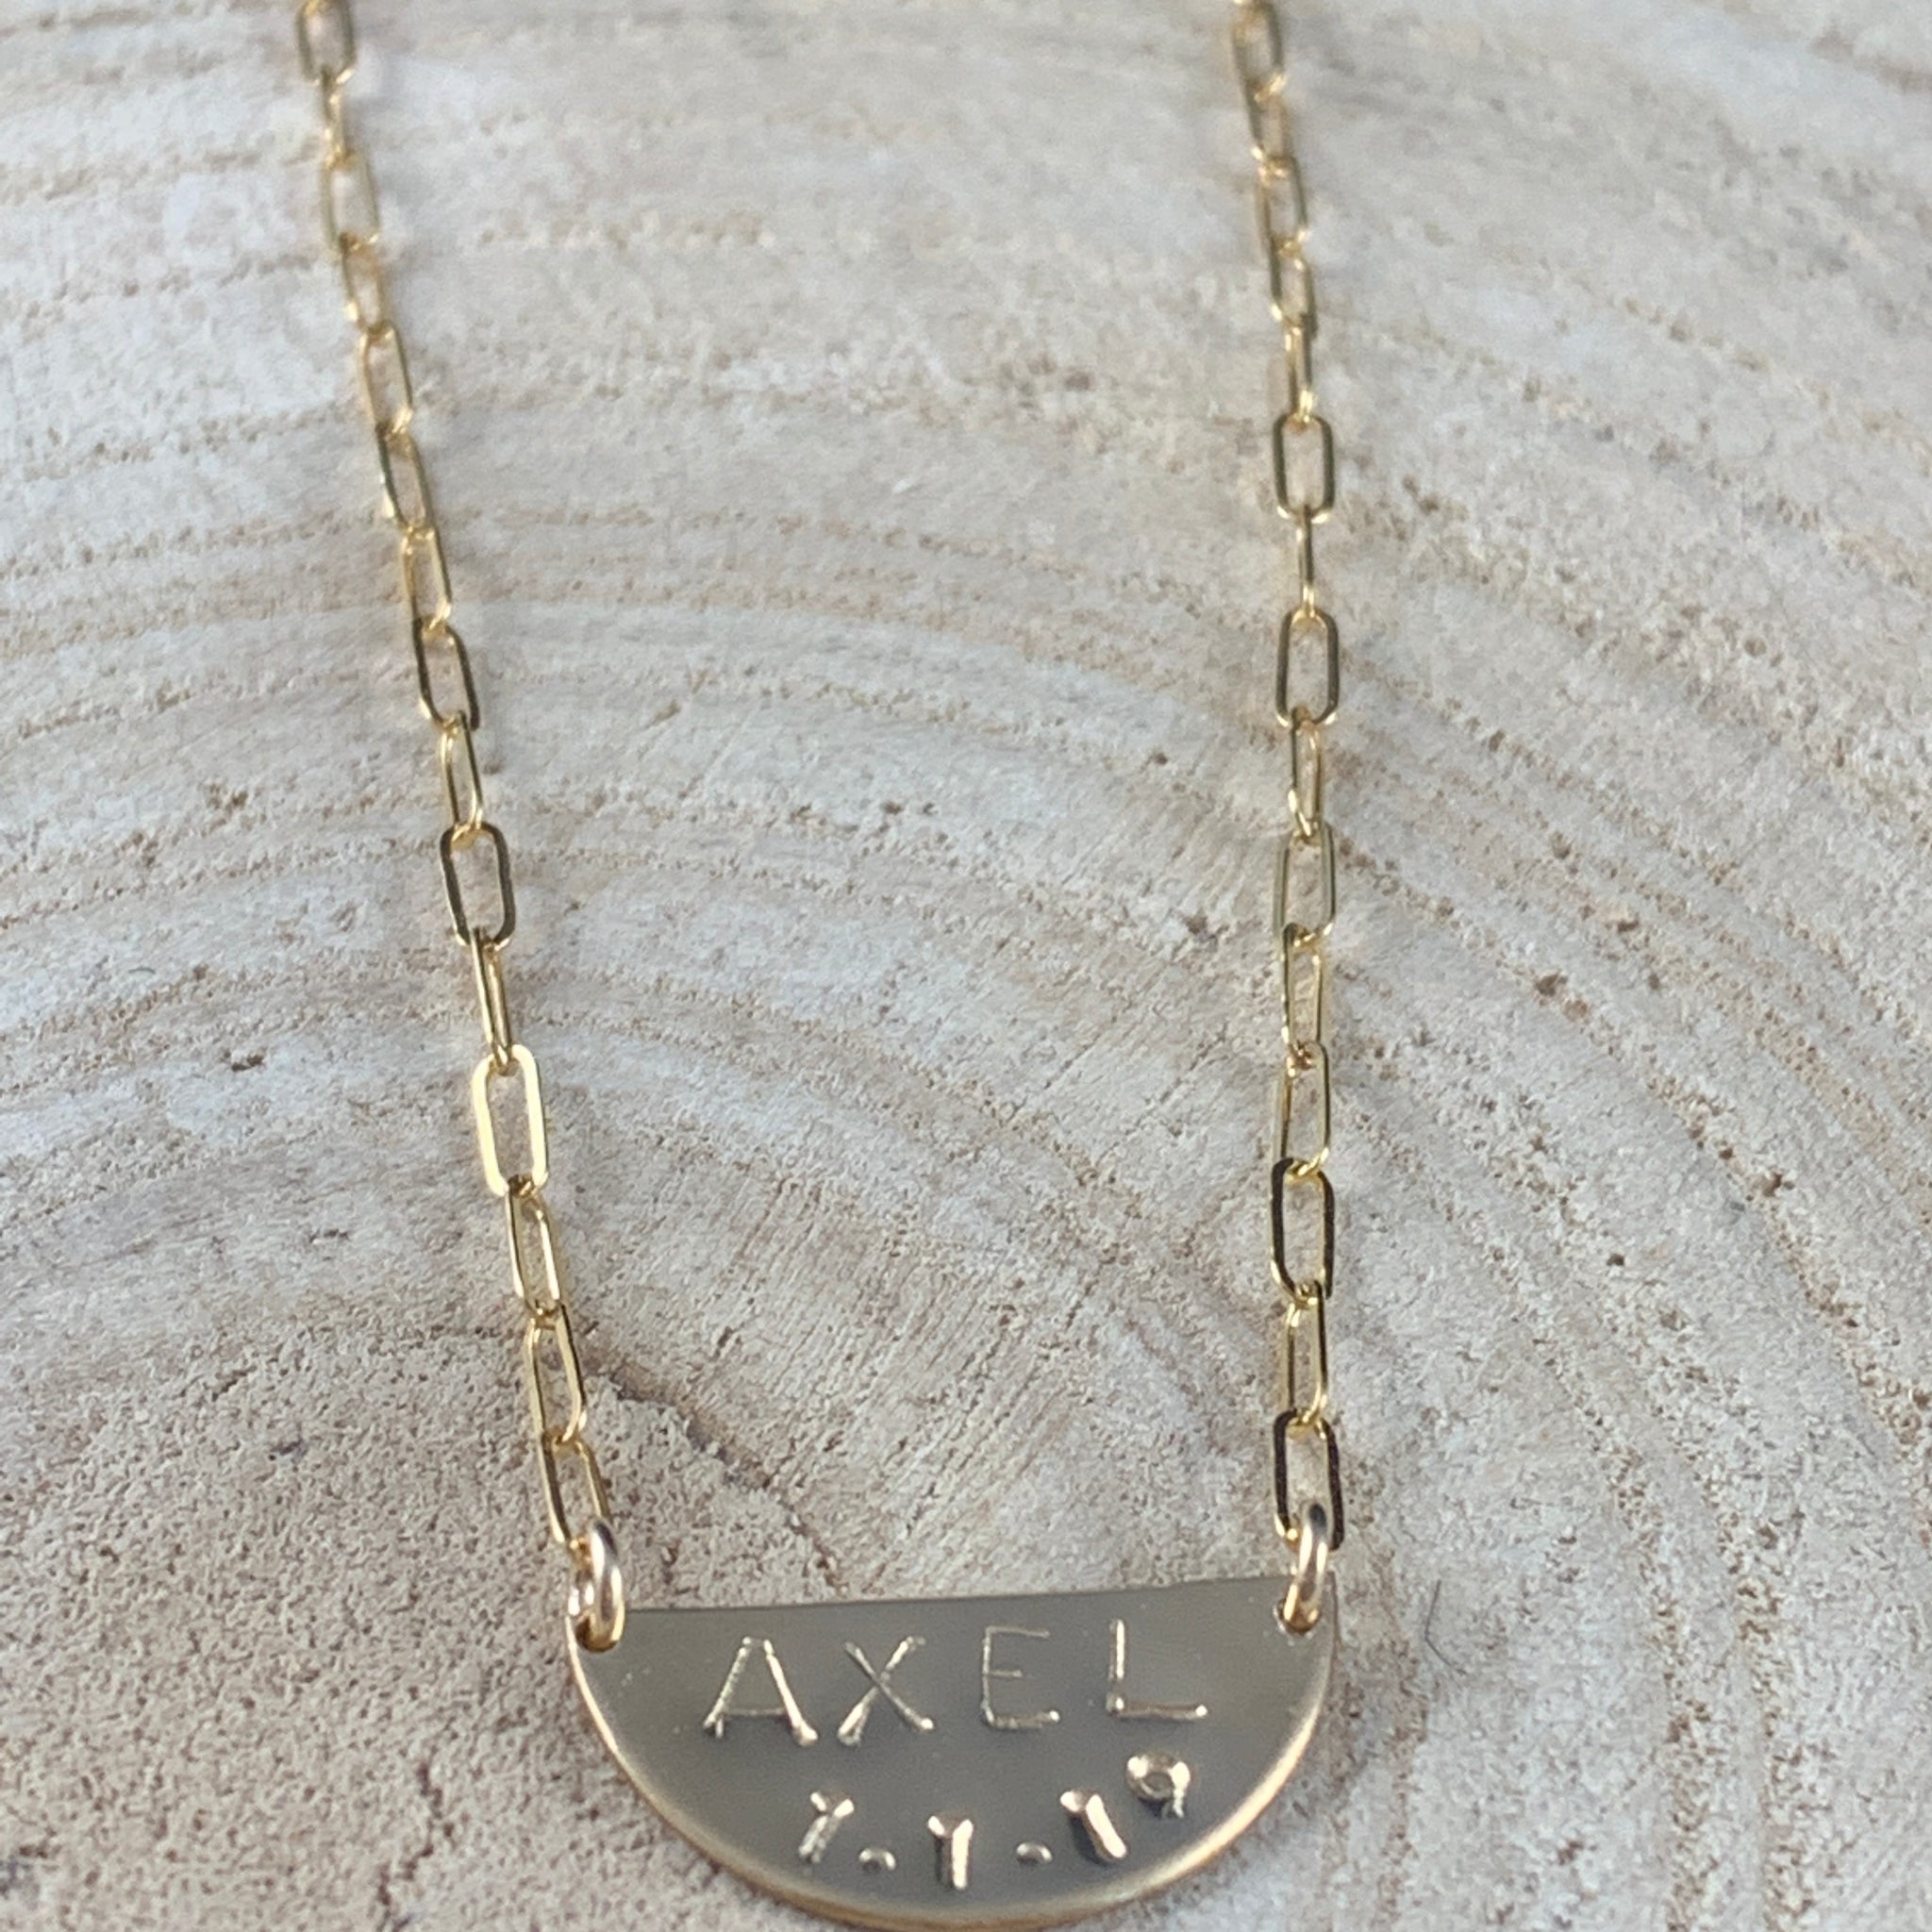 Half moon dainty name necklace, dainty personalized necklace,